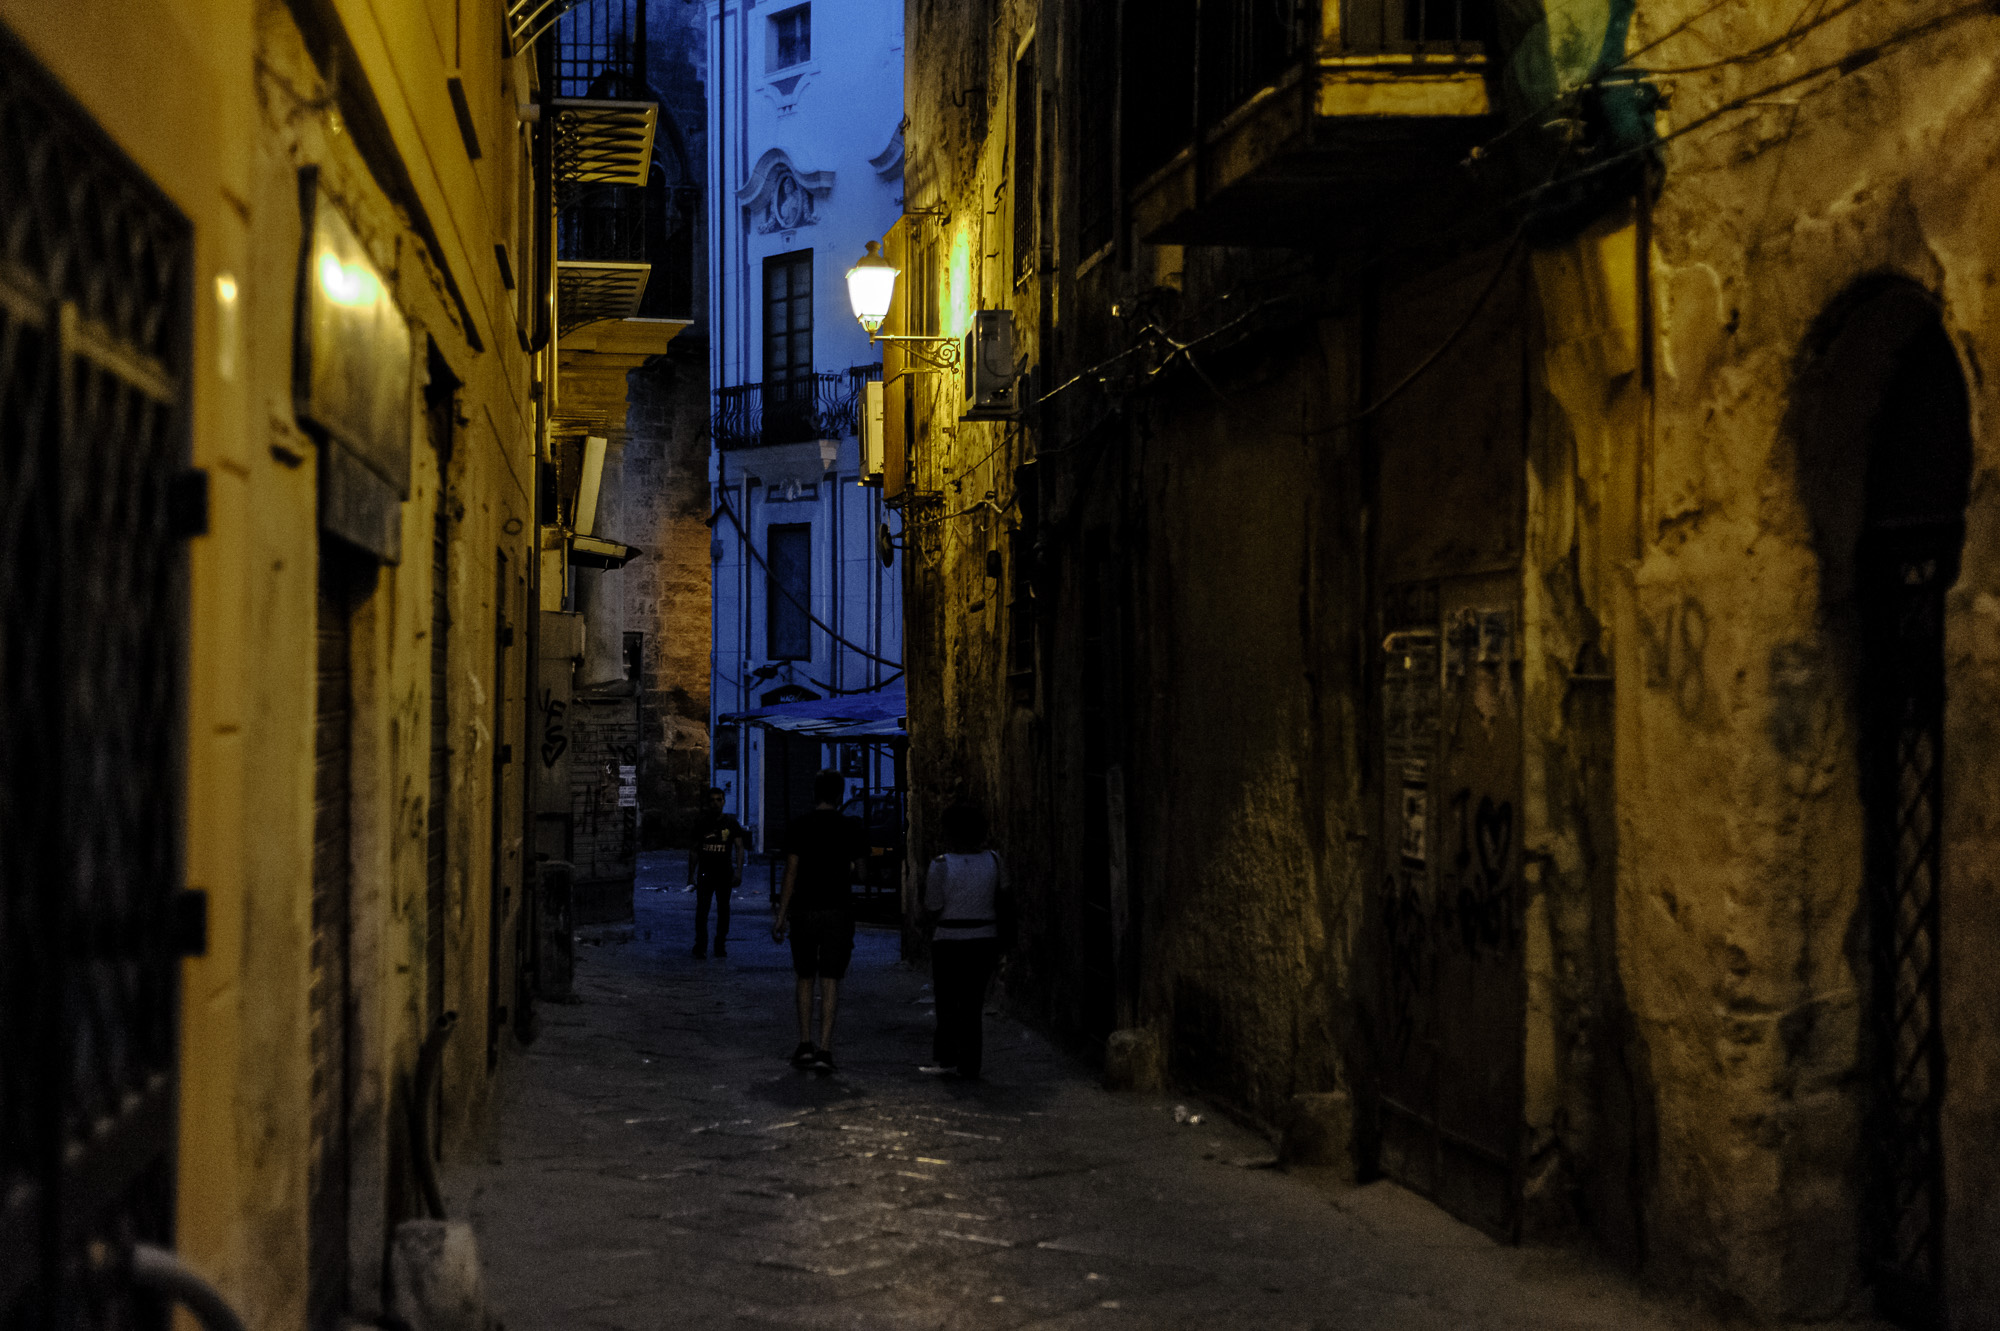 People walking in the narrow streeets of Palermo historic center. Nikon D700 ISO 6400